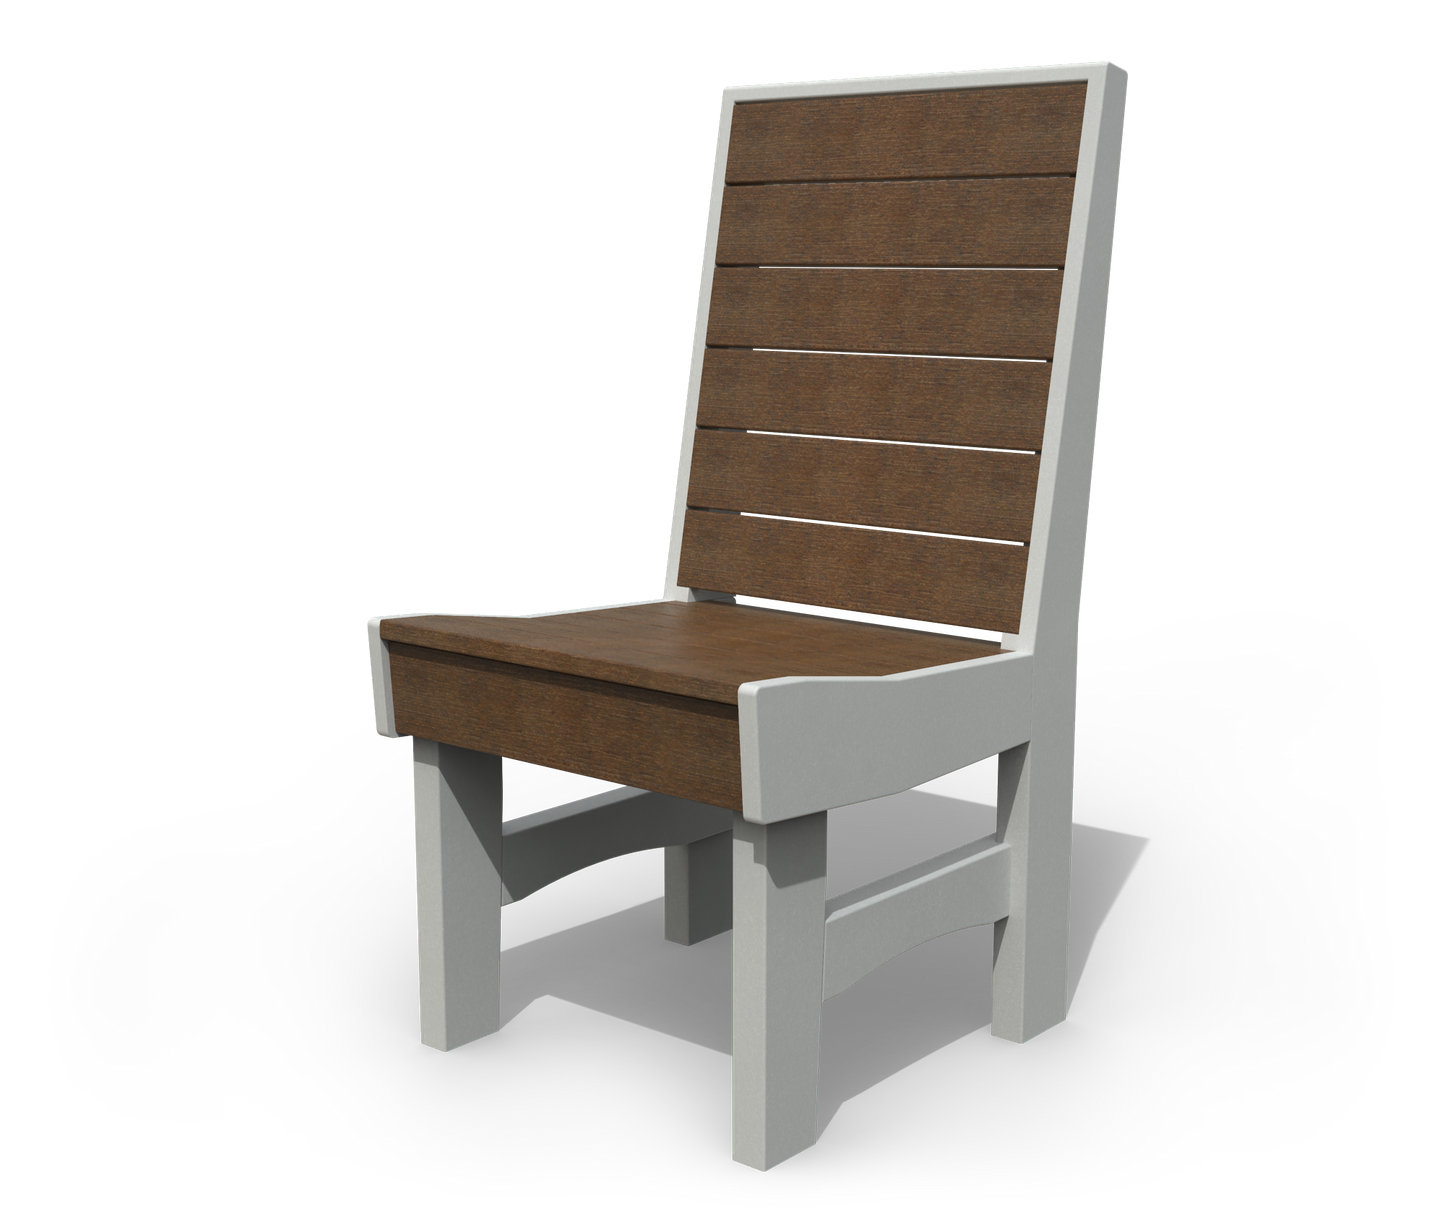 Patiova Recycled Plastic Urban Harbour Dining Side Chair - LEAD TIME TO SHIP 4 WEEKS